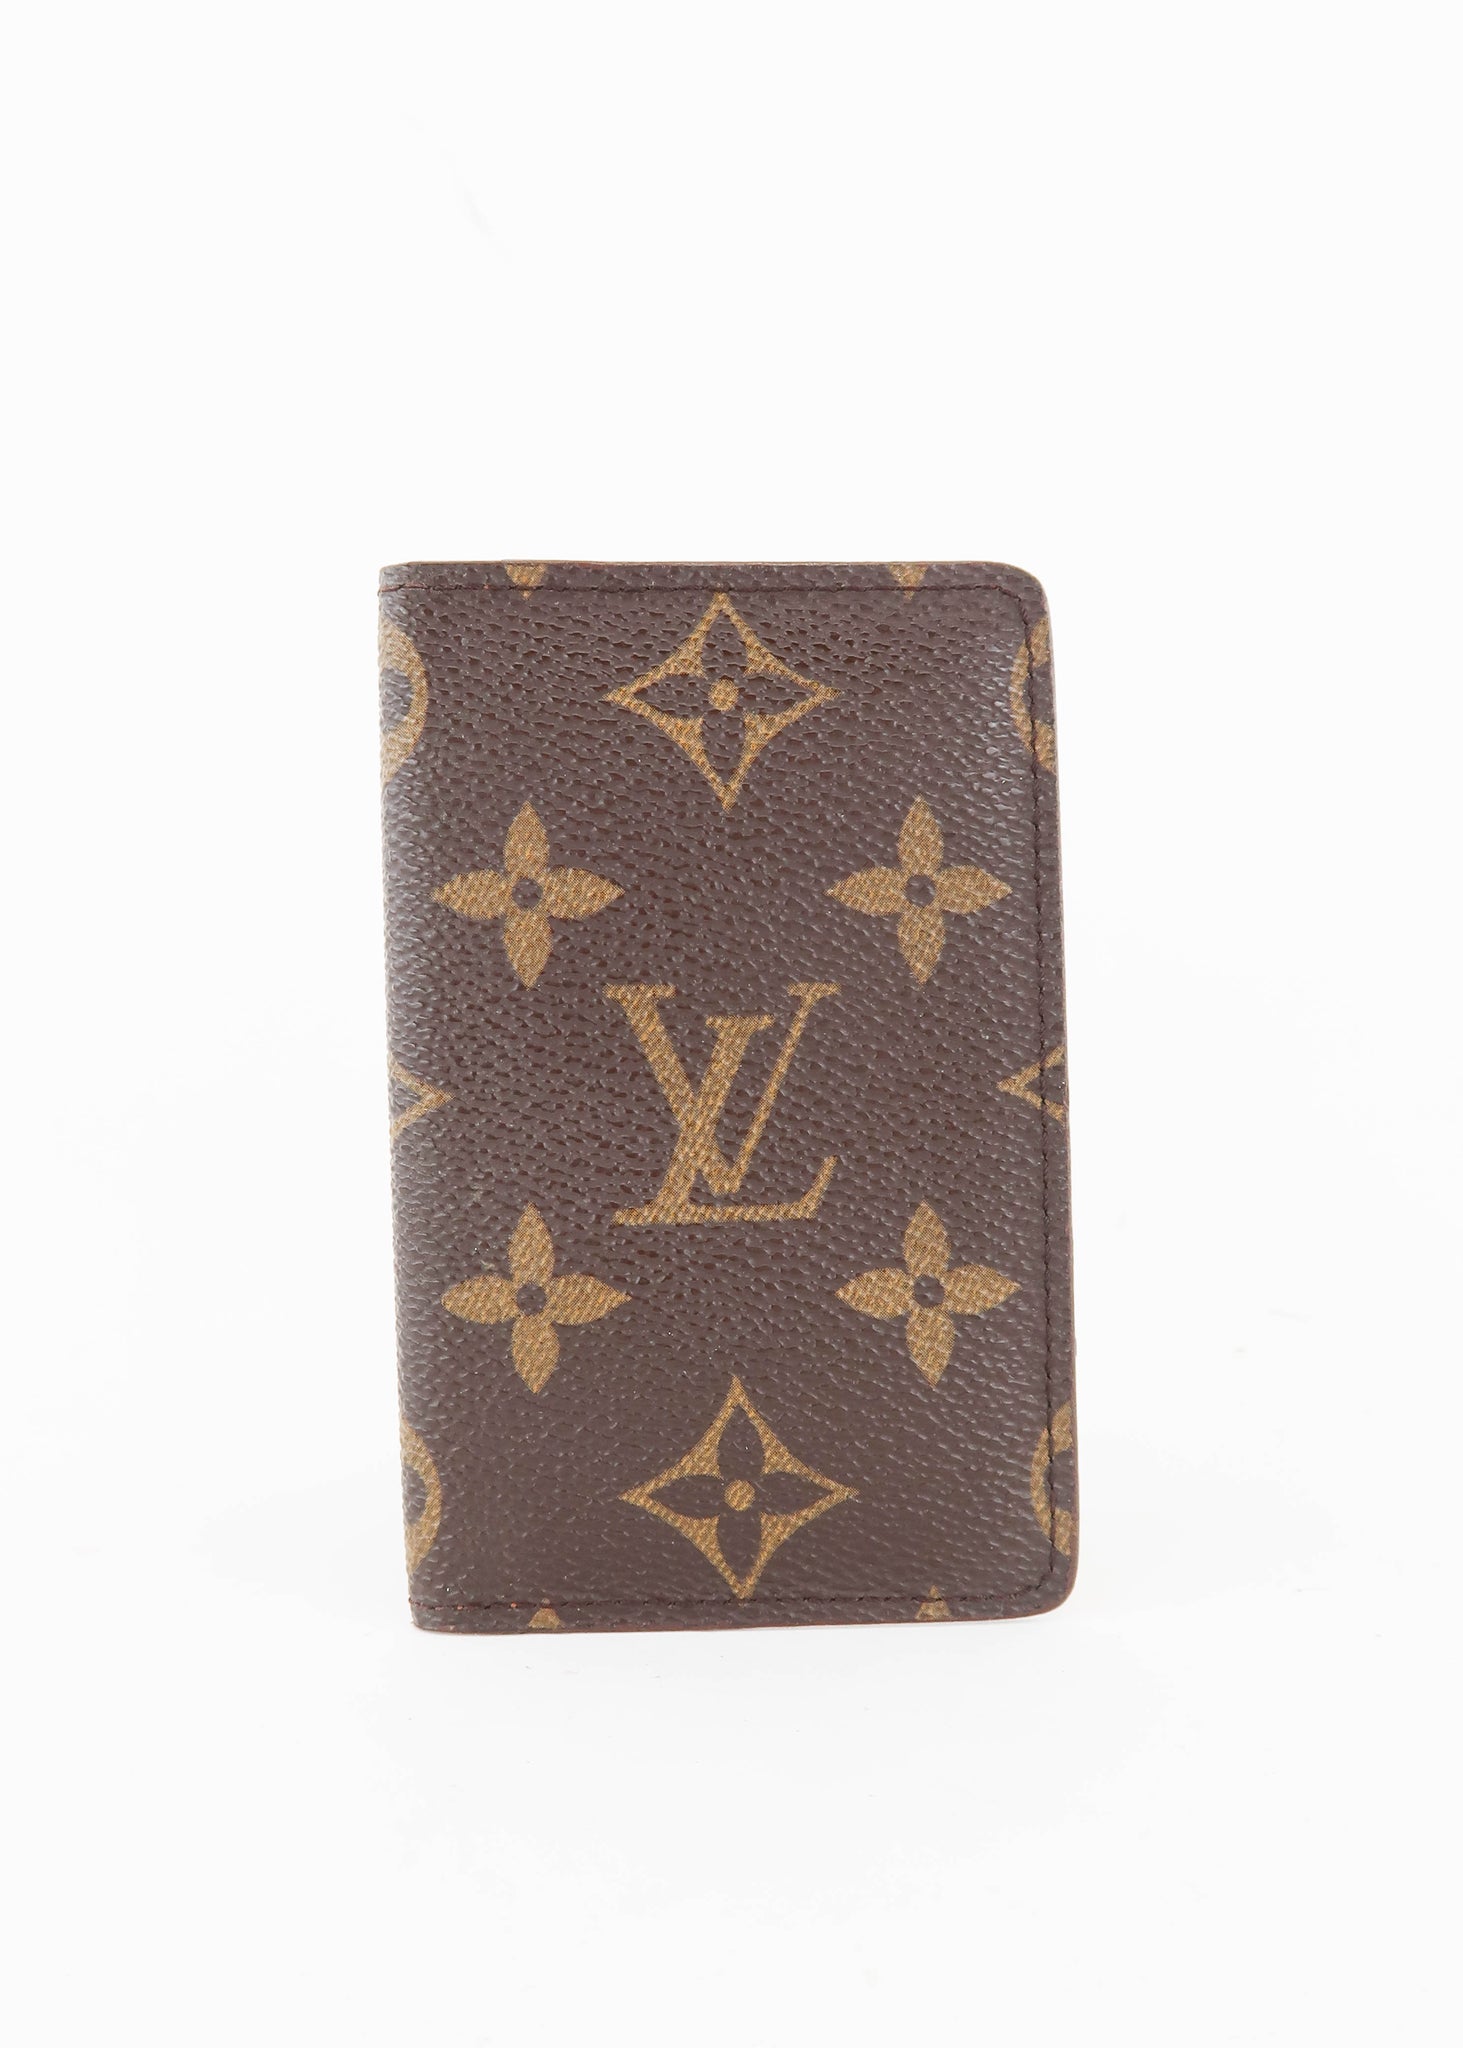 How many cards fit in the Louis Vuitton Pocket Organizer? 